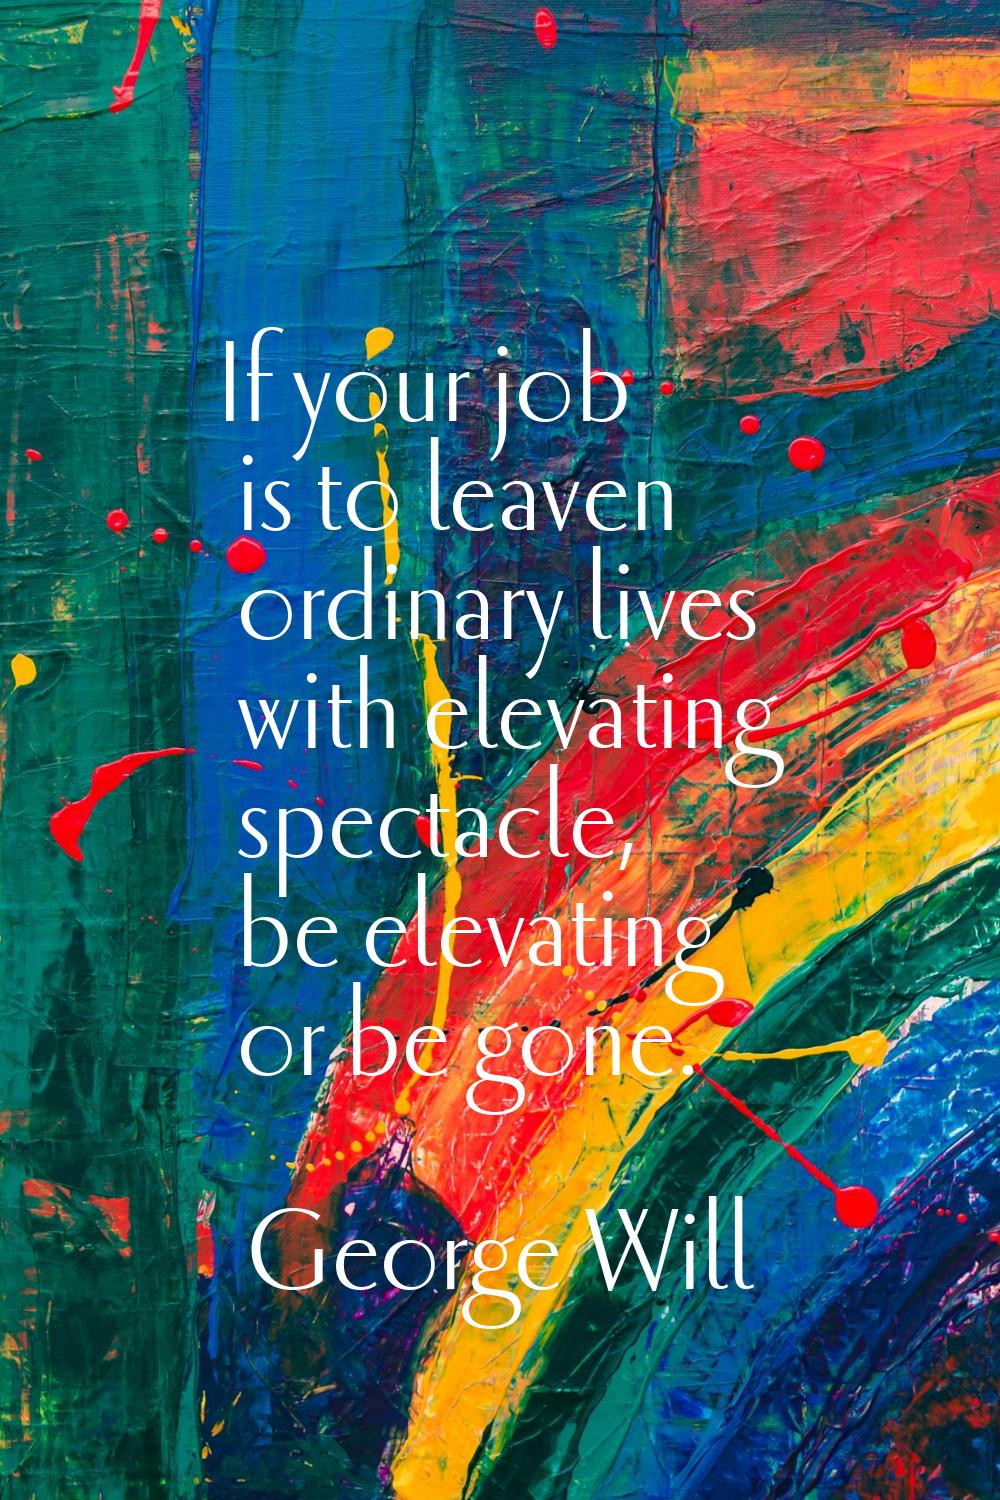 If your job is to leaven ordinary lives with elevating spectacle, be elevating or be gone.